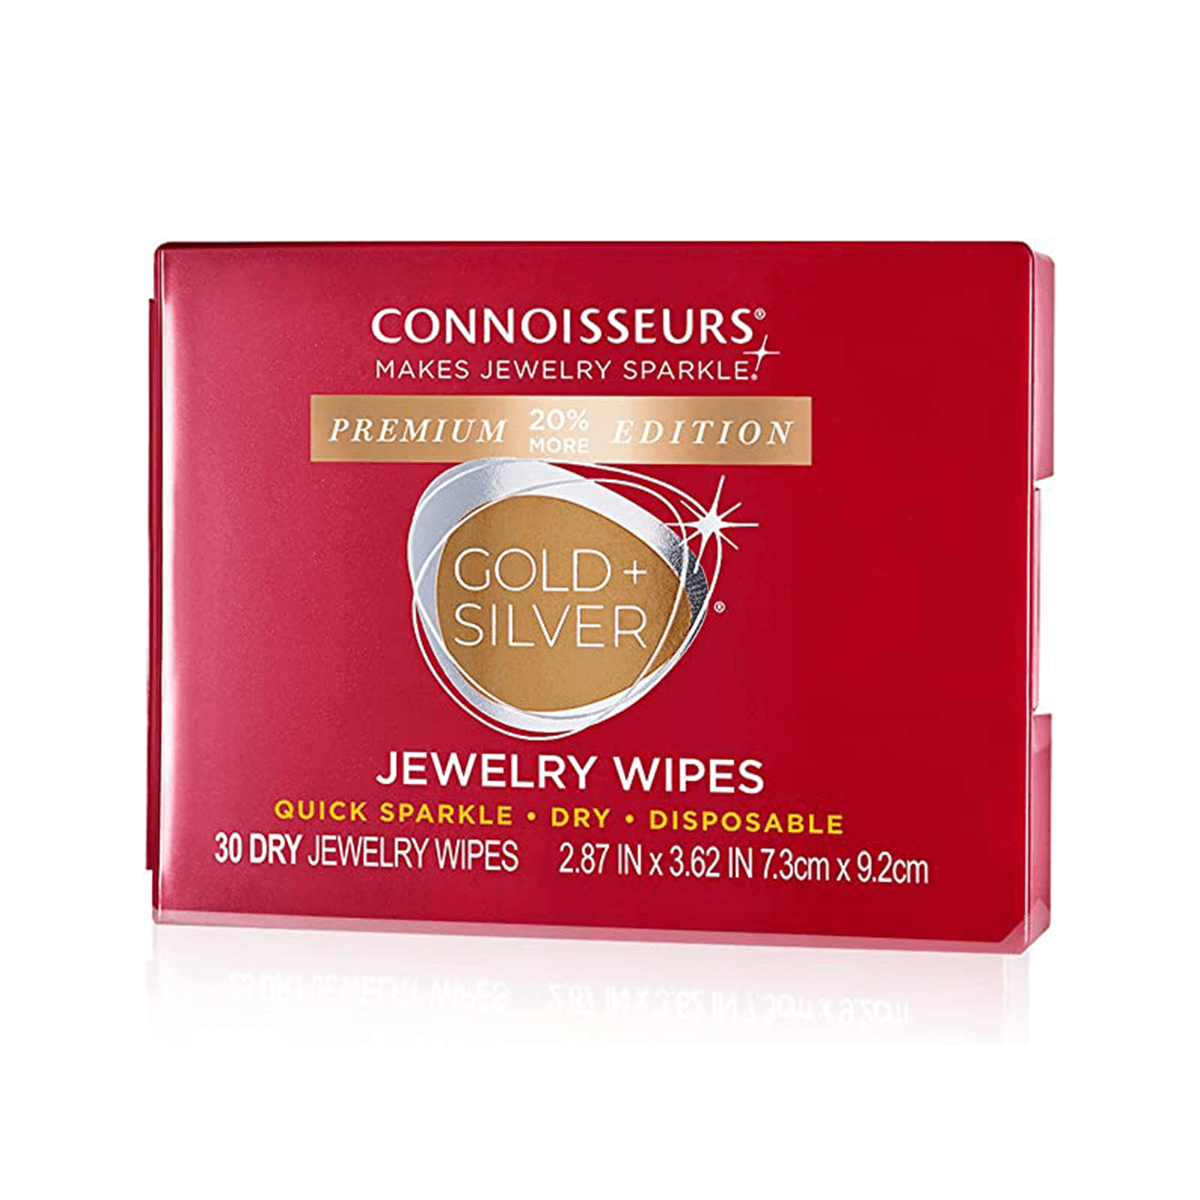 Connoisseurs Jewelry Wipes, $8.99